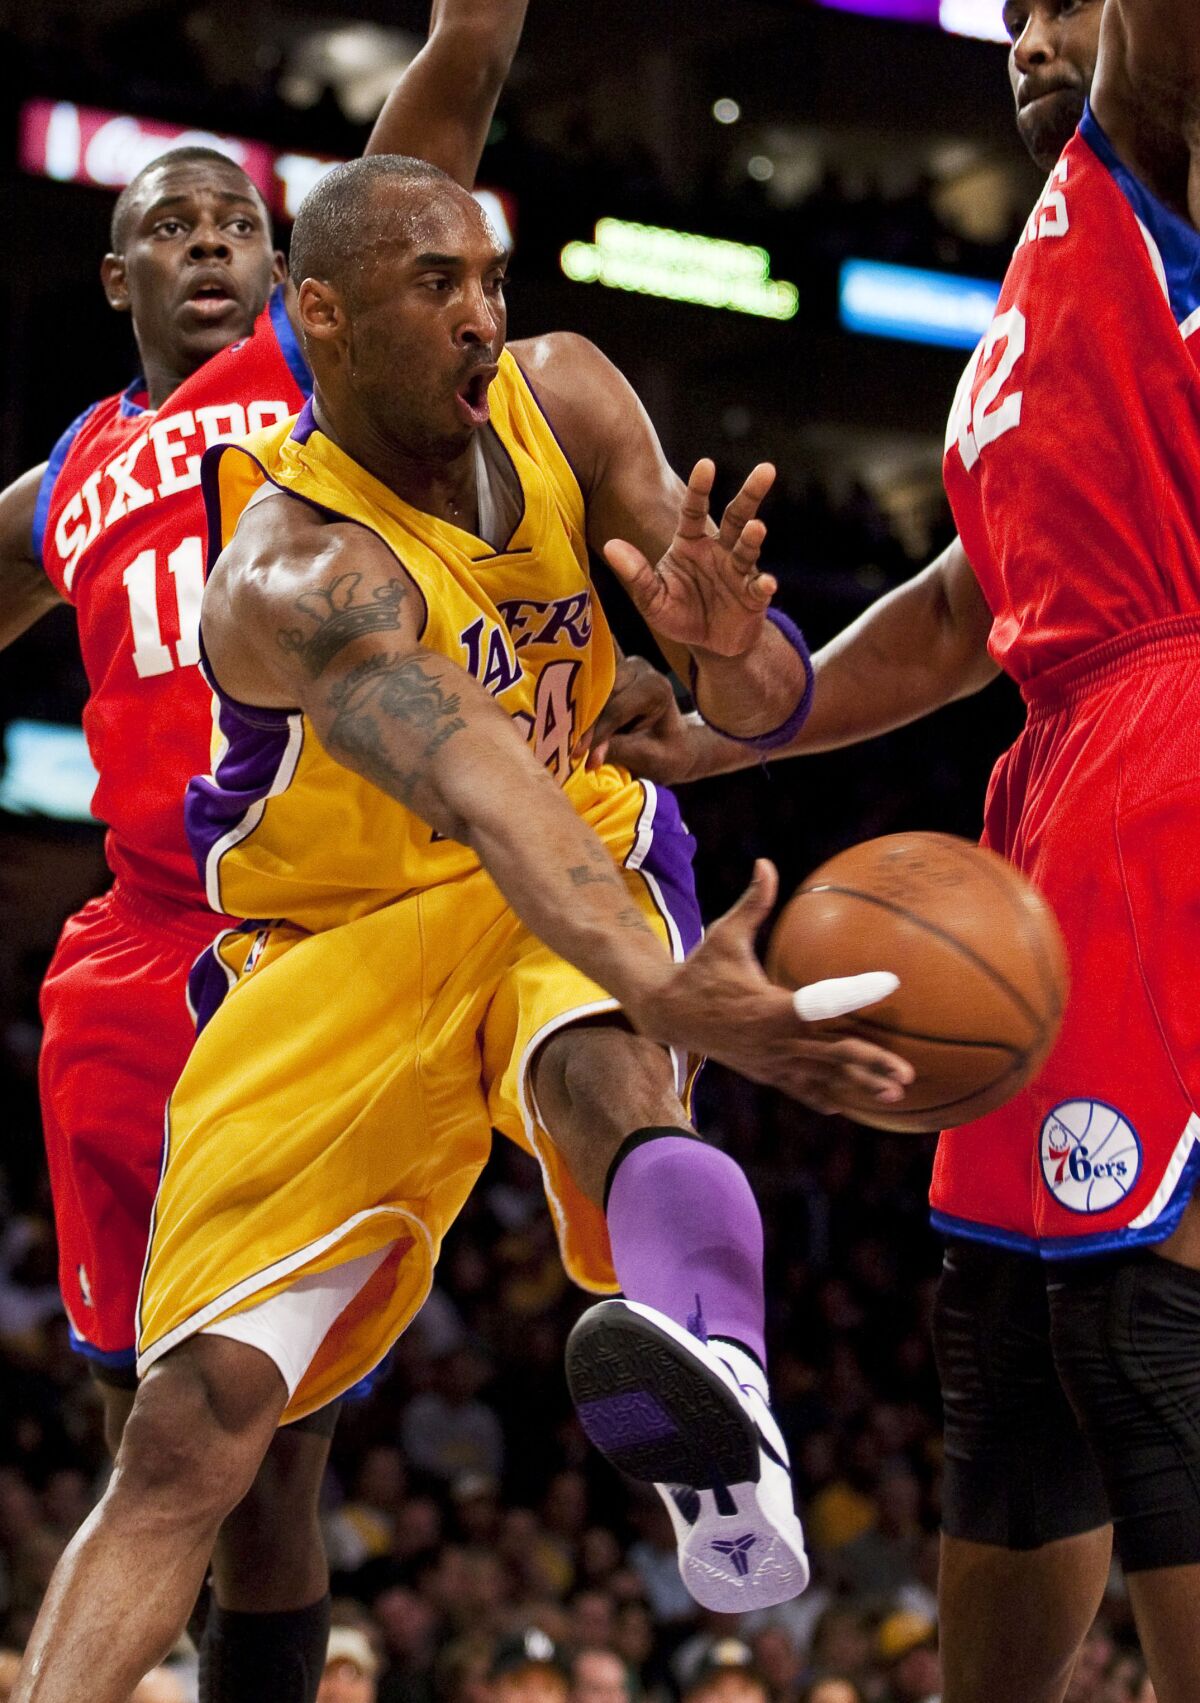 Kobe Bryant passes the ball while being guarded by 76ers guard Jrue Holiday and Elton Brand.